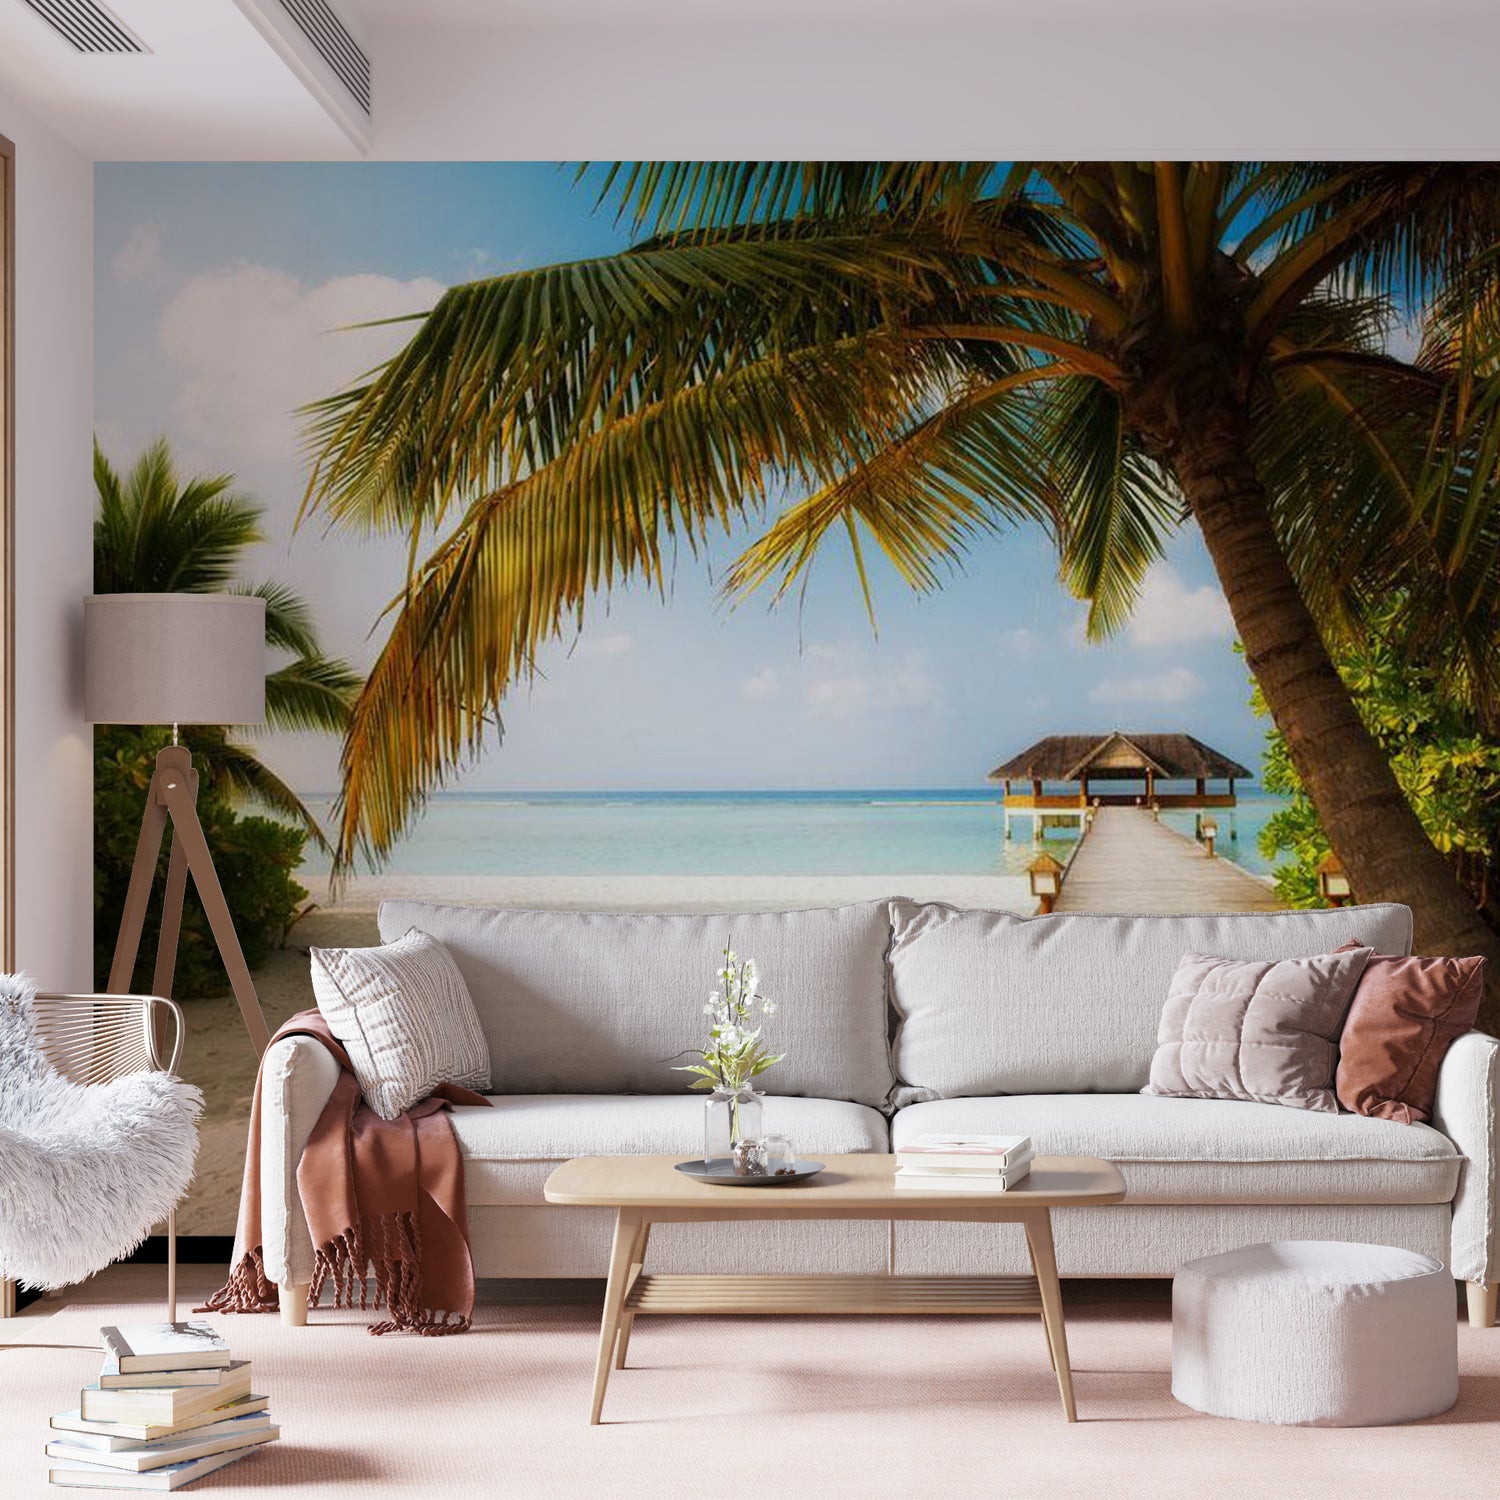 Peel & Stick Beach Wall Mural - Paradise Beach - Removable Wall Decals